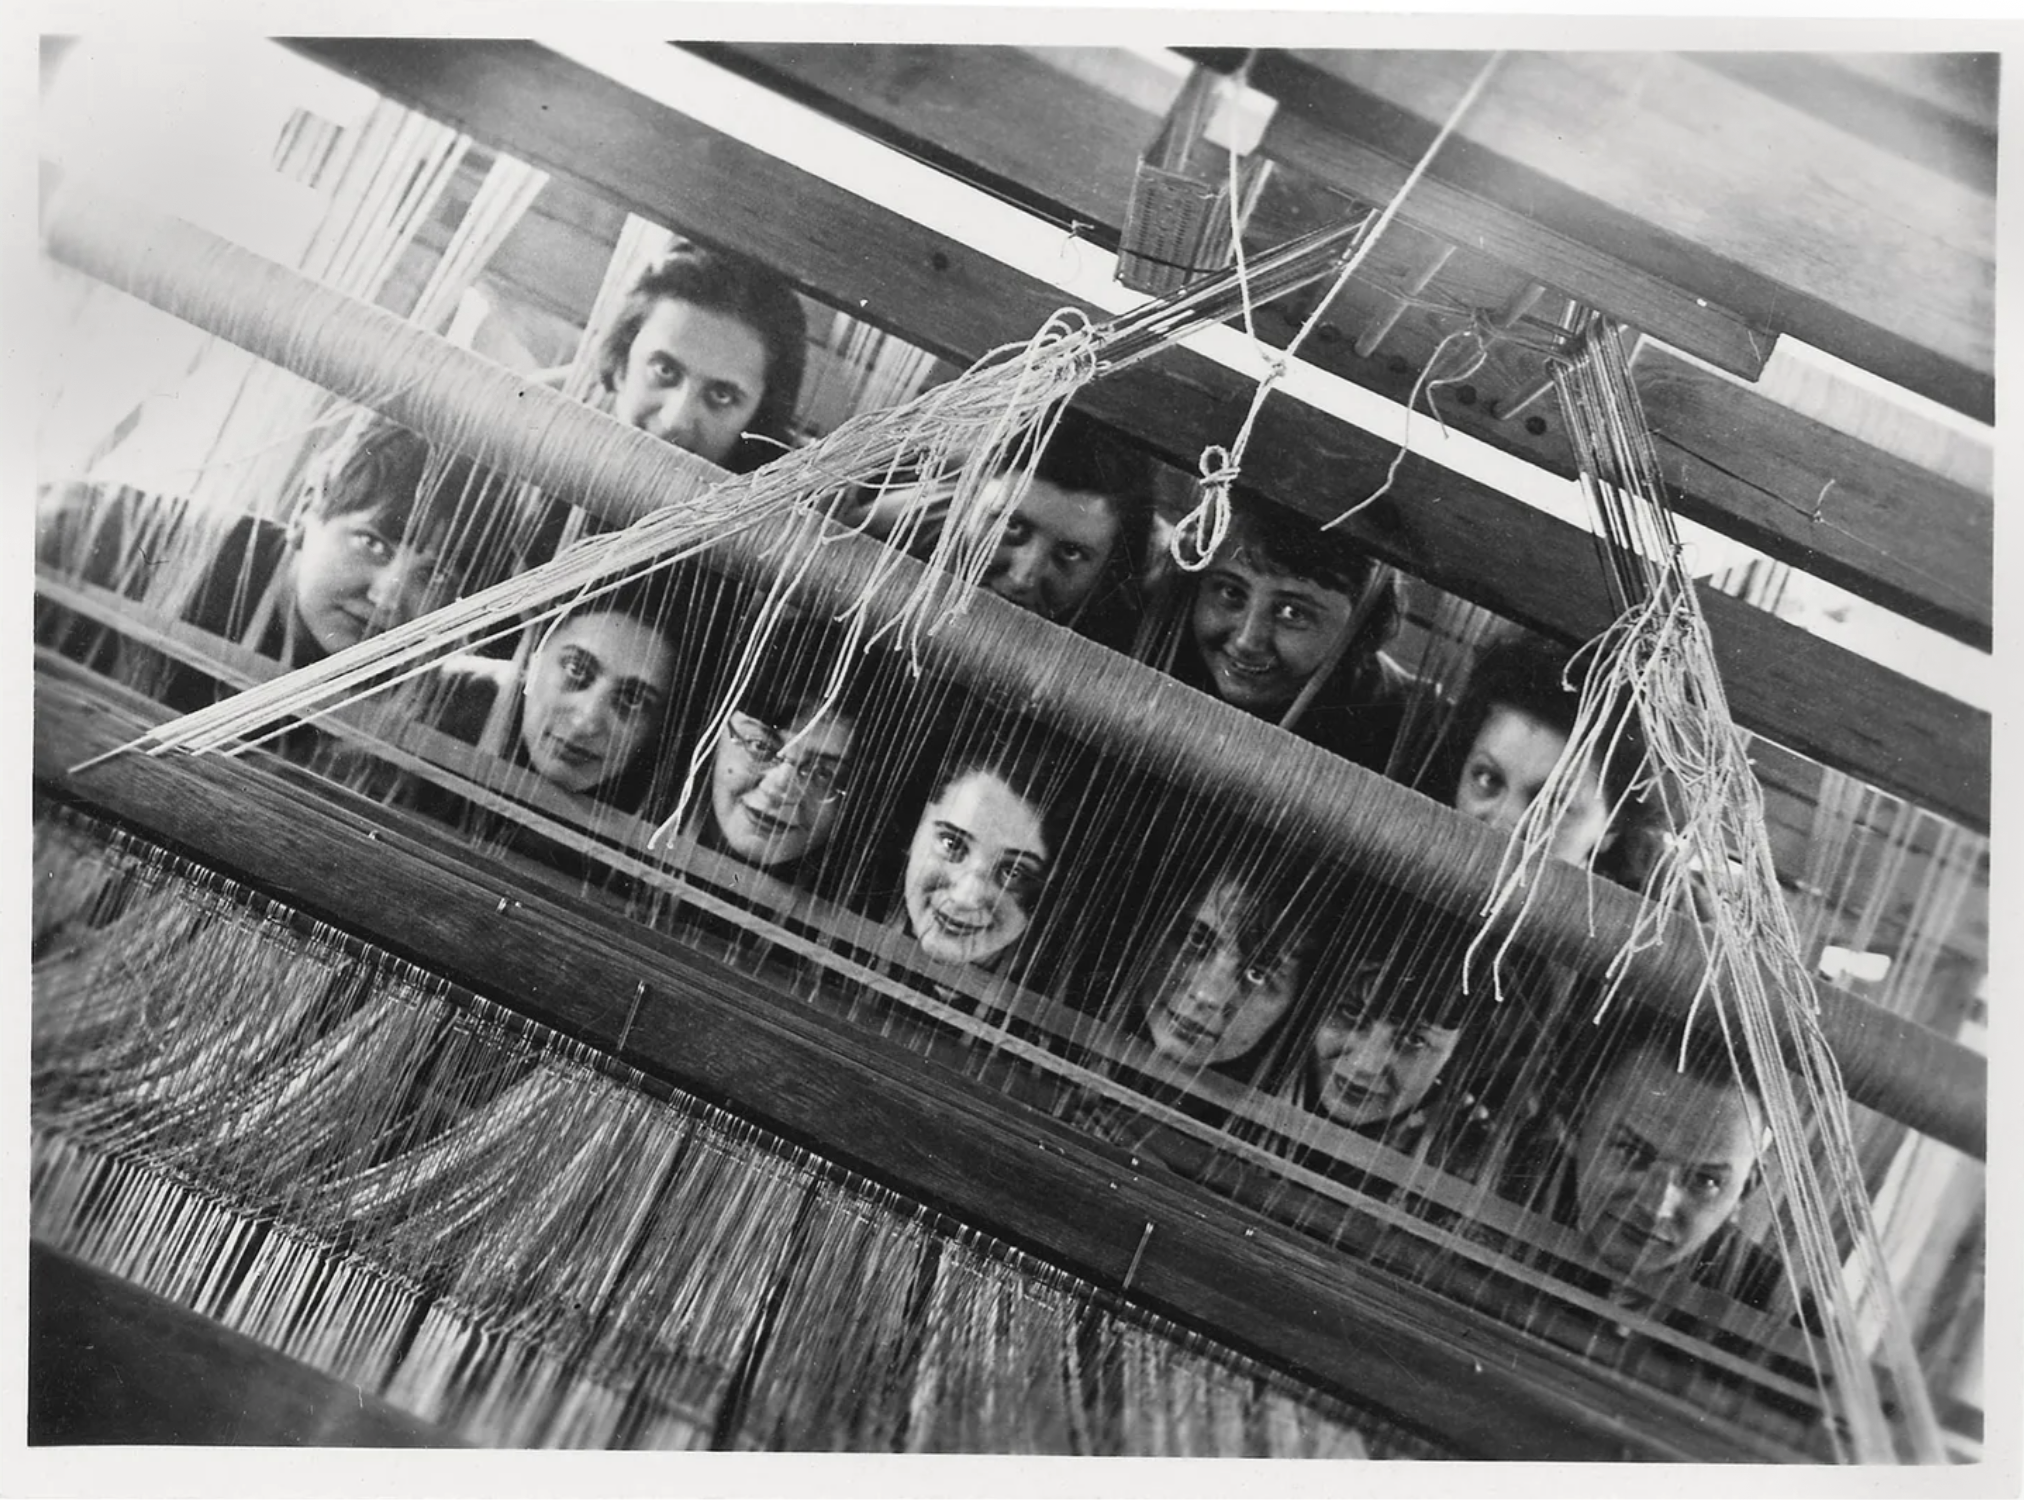 Weaving students at the Bauhaus, 1928, Anni Albers poses in the bottom row, second from left (Bauhaus Archive, Berlin)